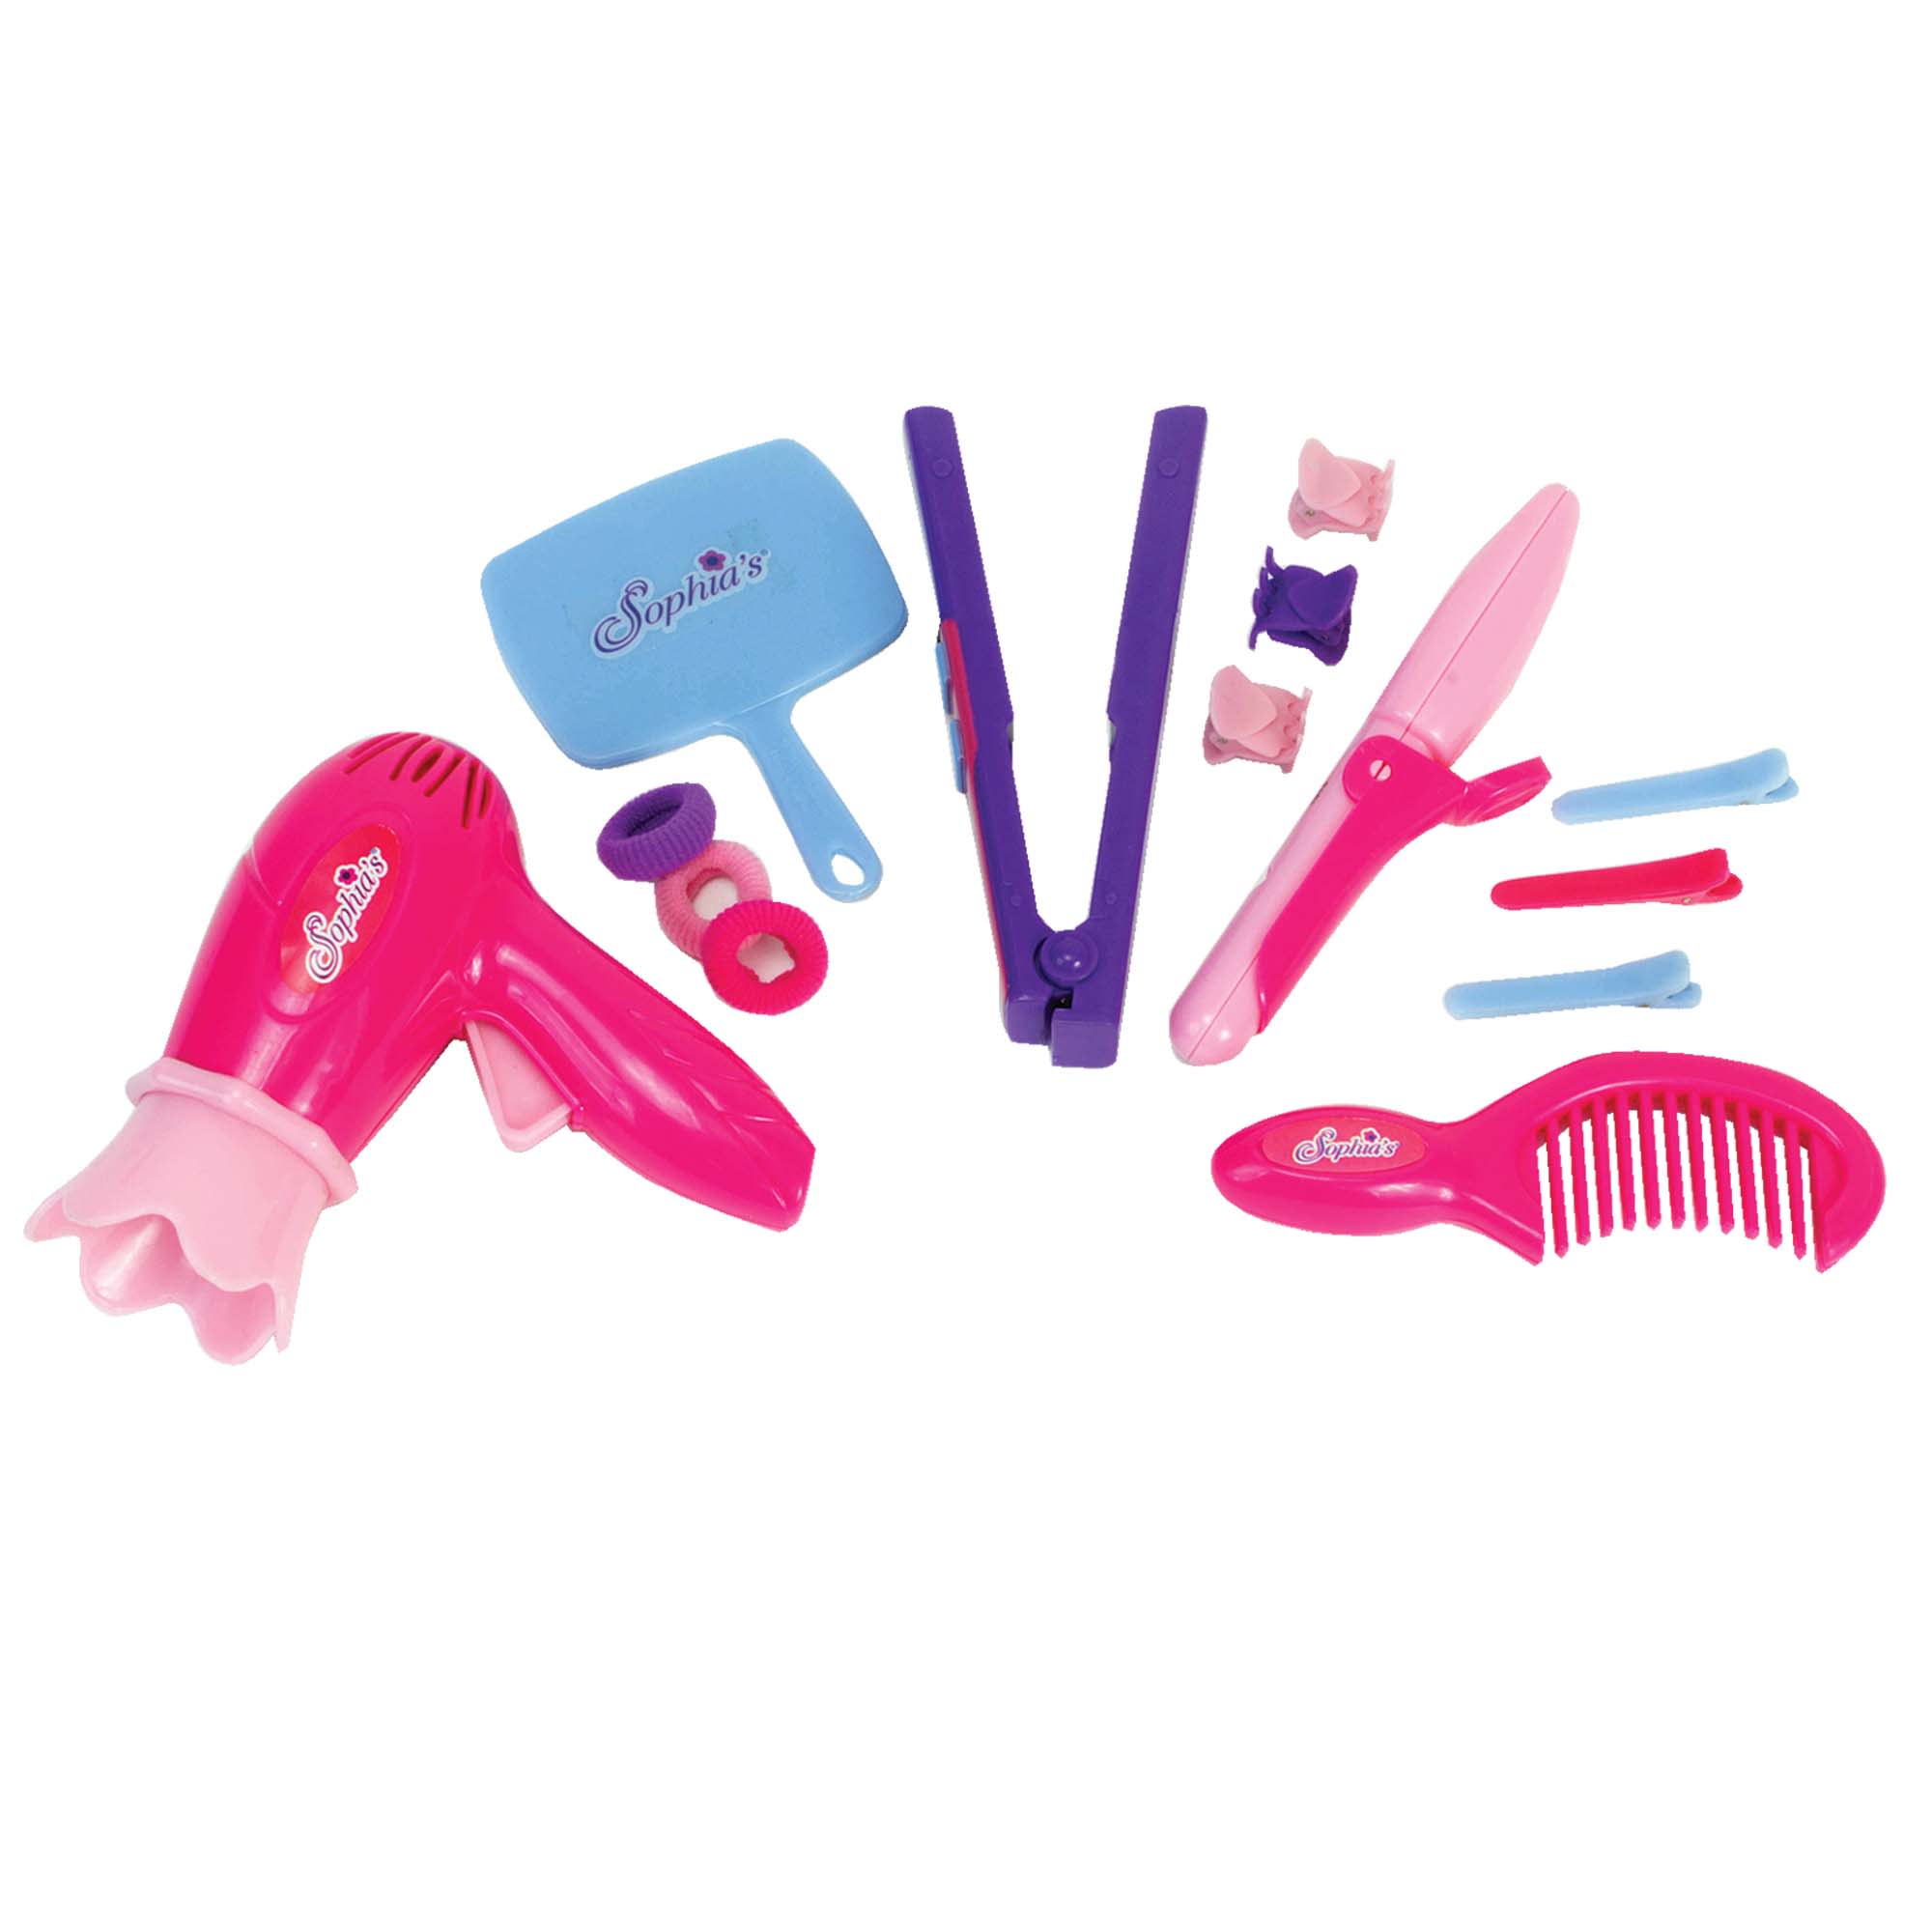 Sophia’s Wig Hairbrush Accessory with Bristles for 18 Dolls